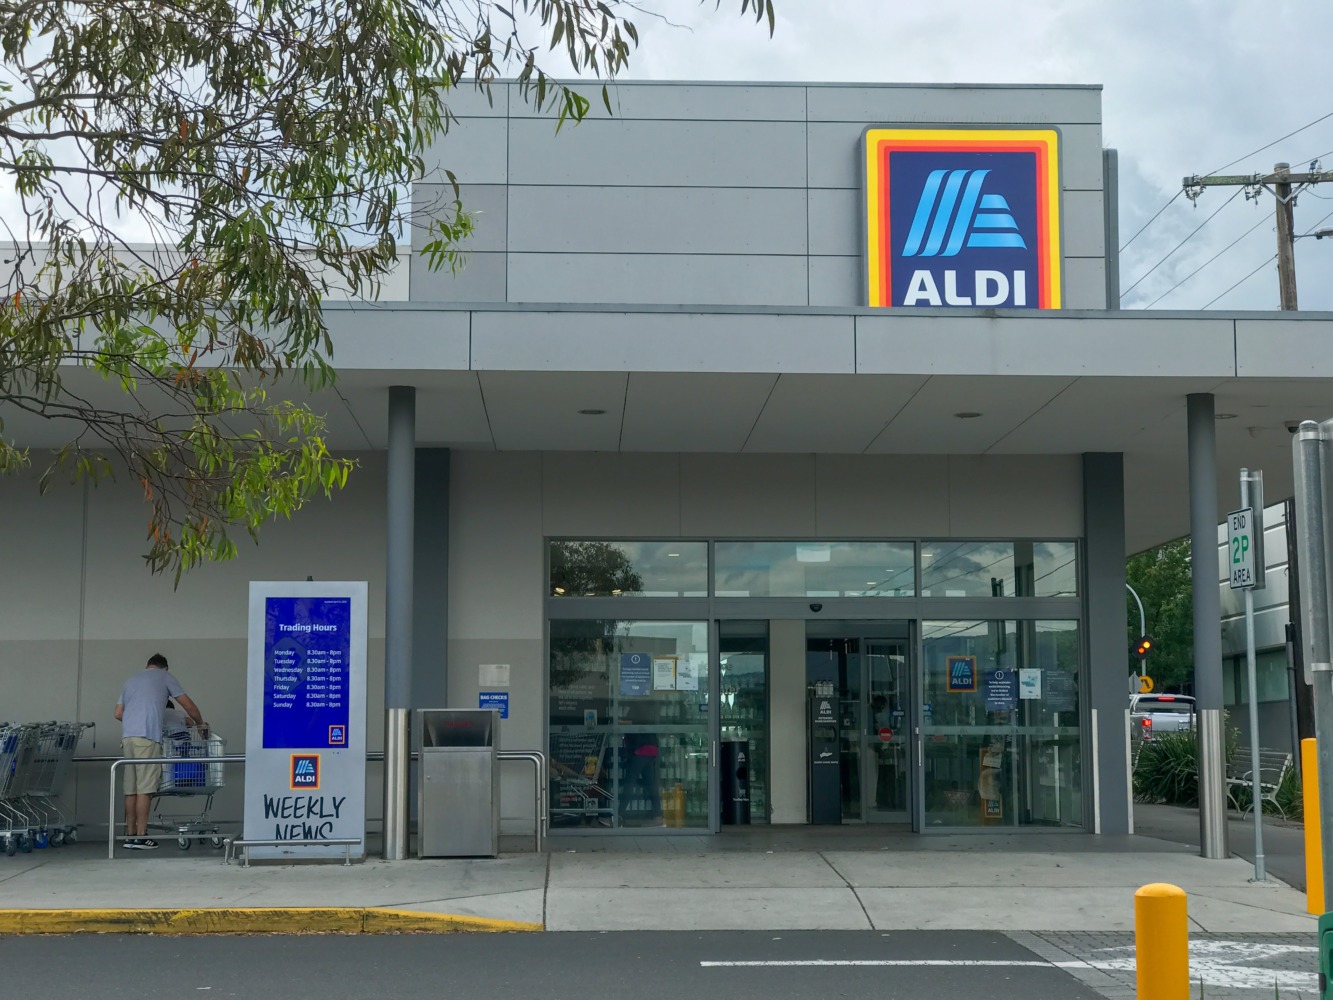 An image of an Aldi storefront